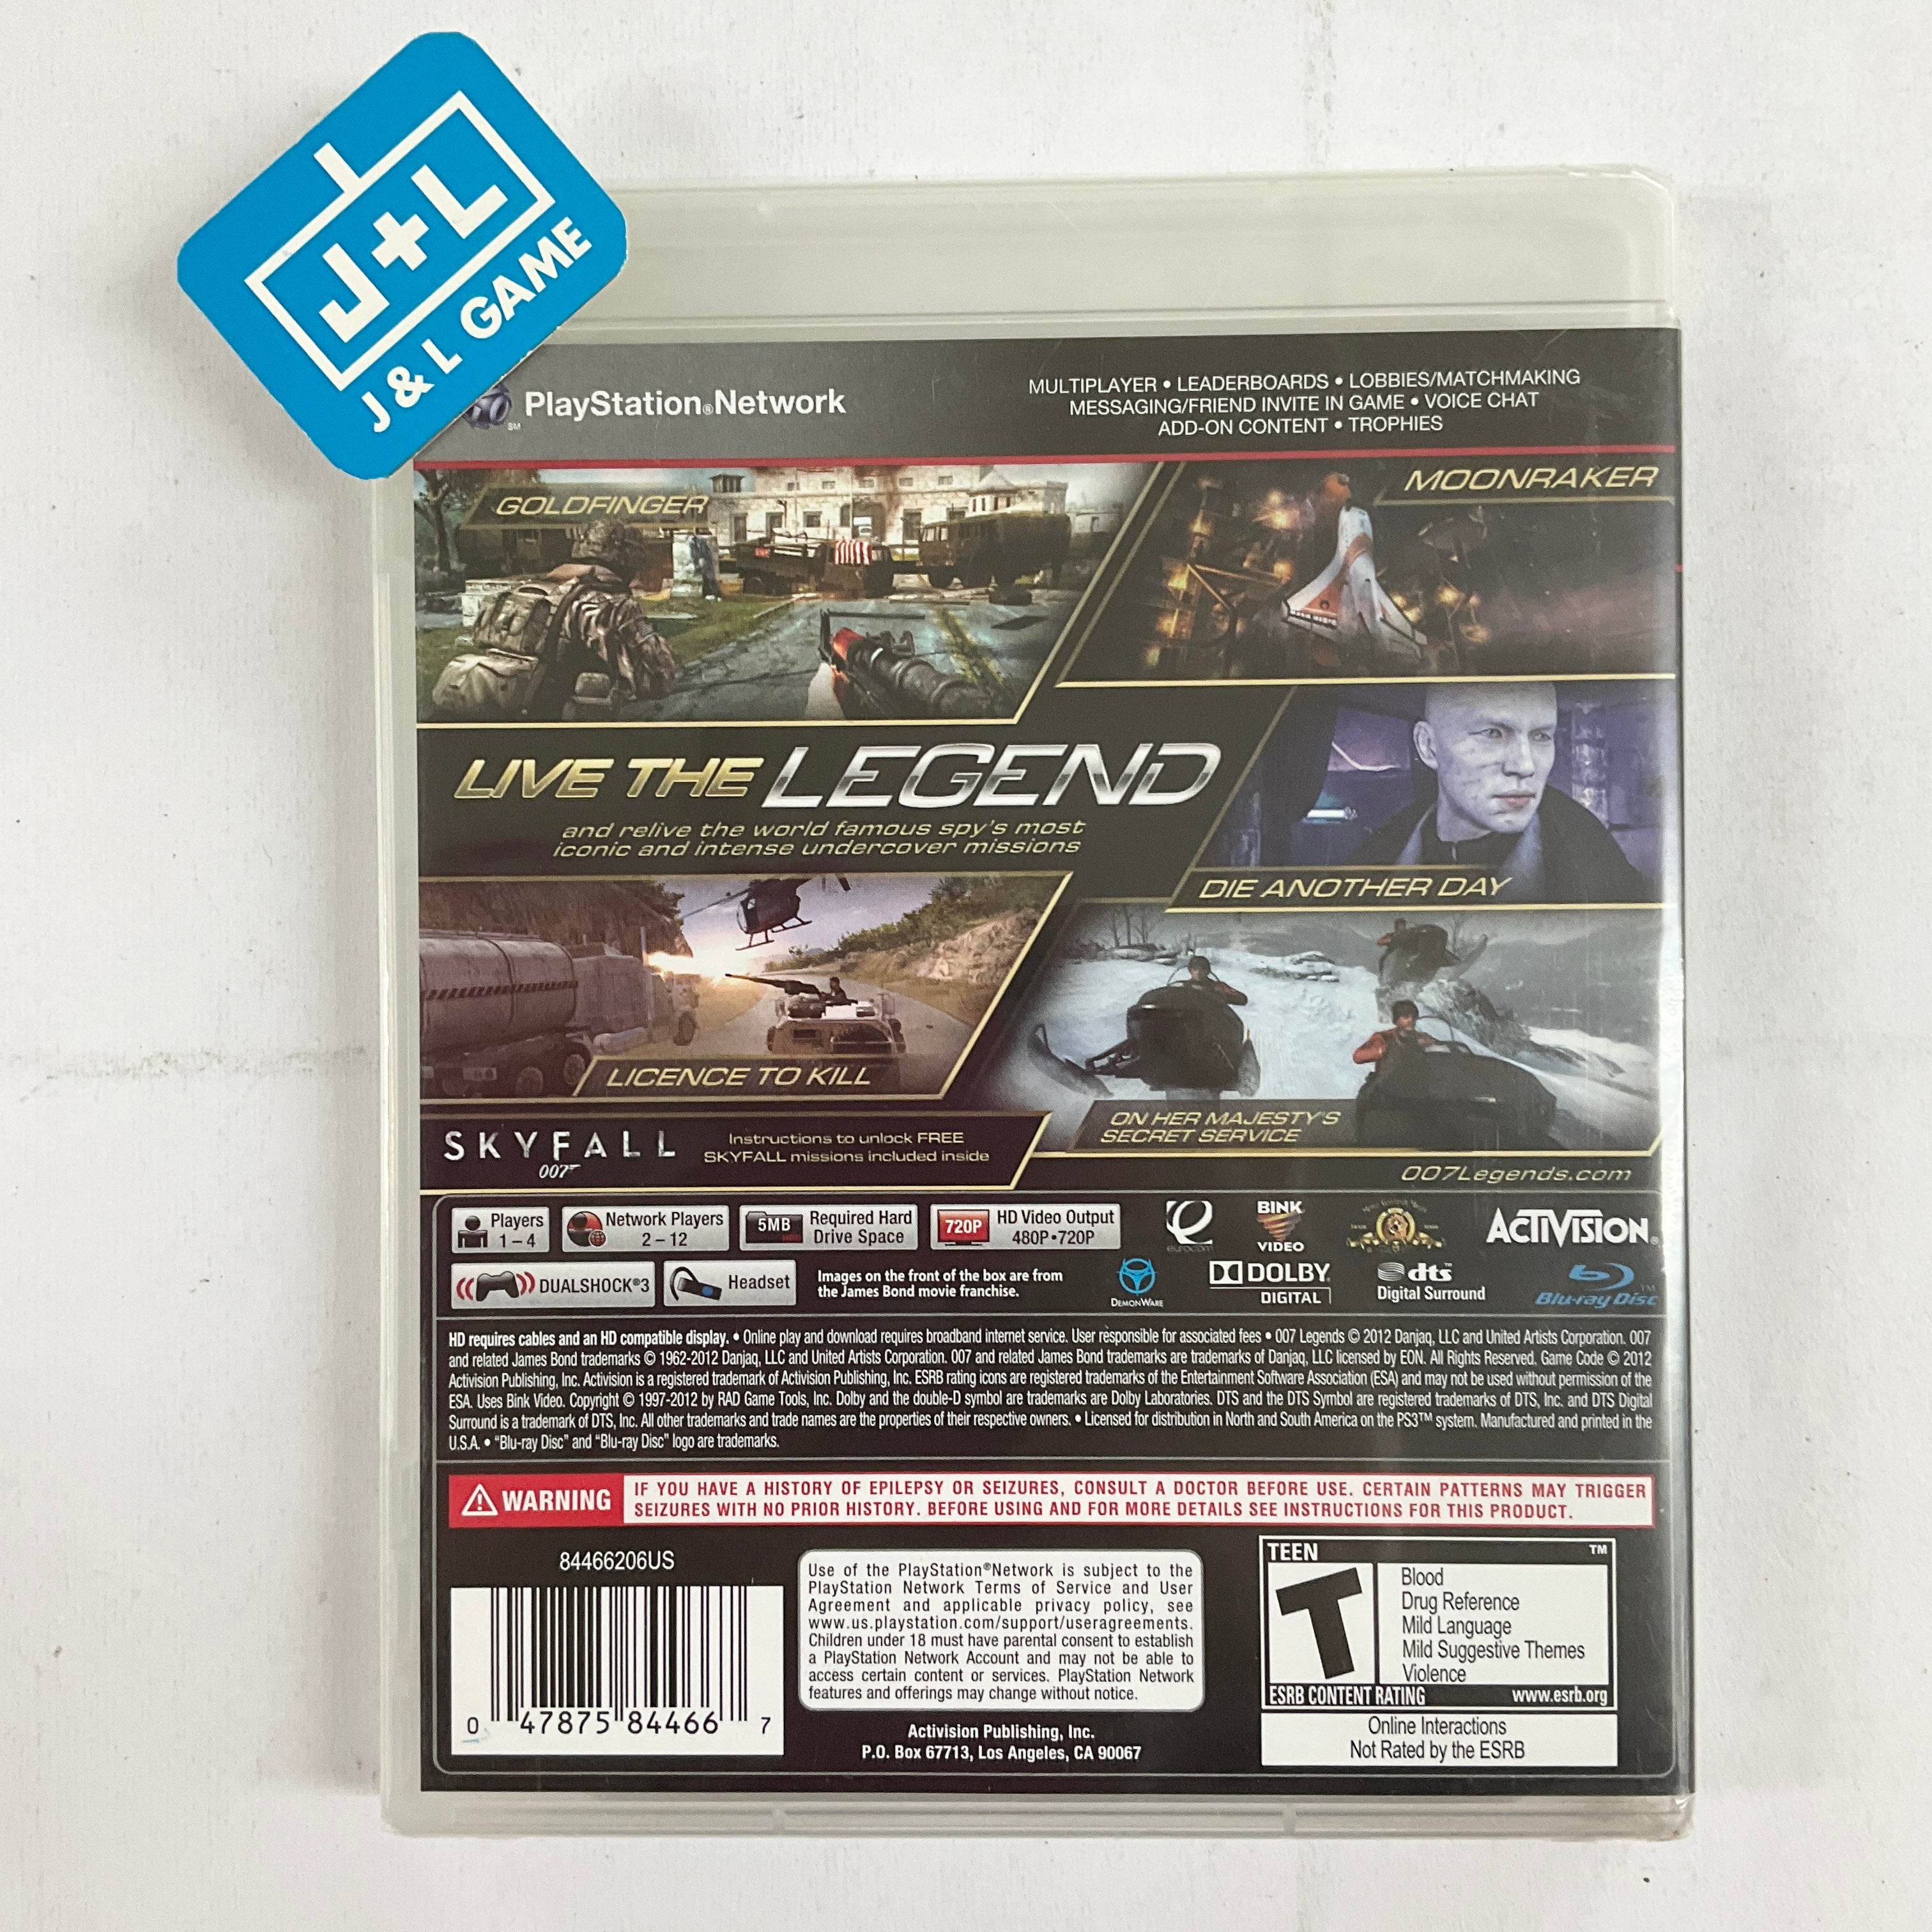 007 Legends - (PS3) PlayStation 3 Video Games Activision   